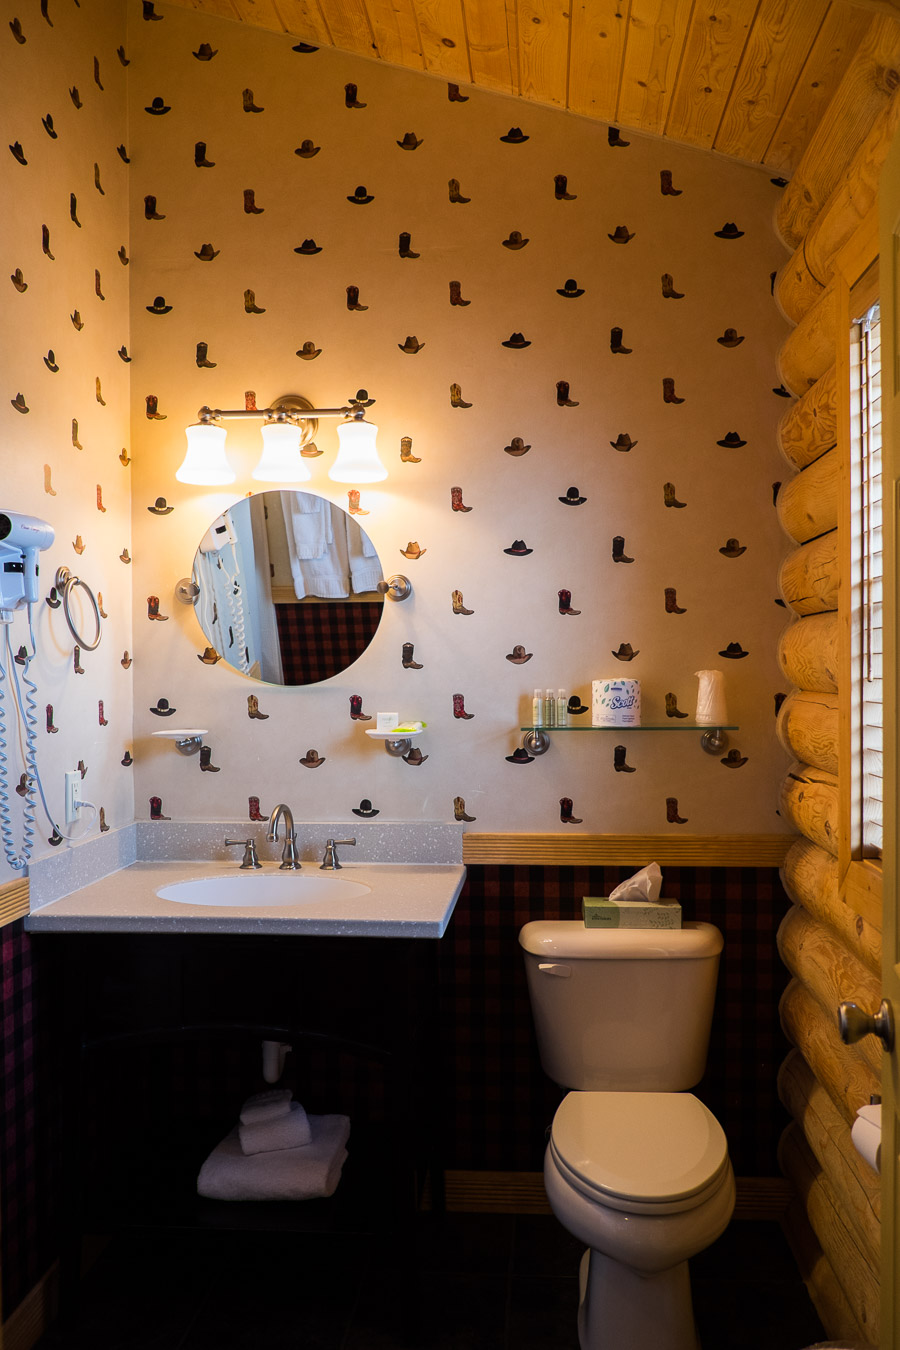 Loved the cowboy boot wallpaper!